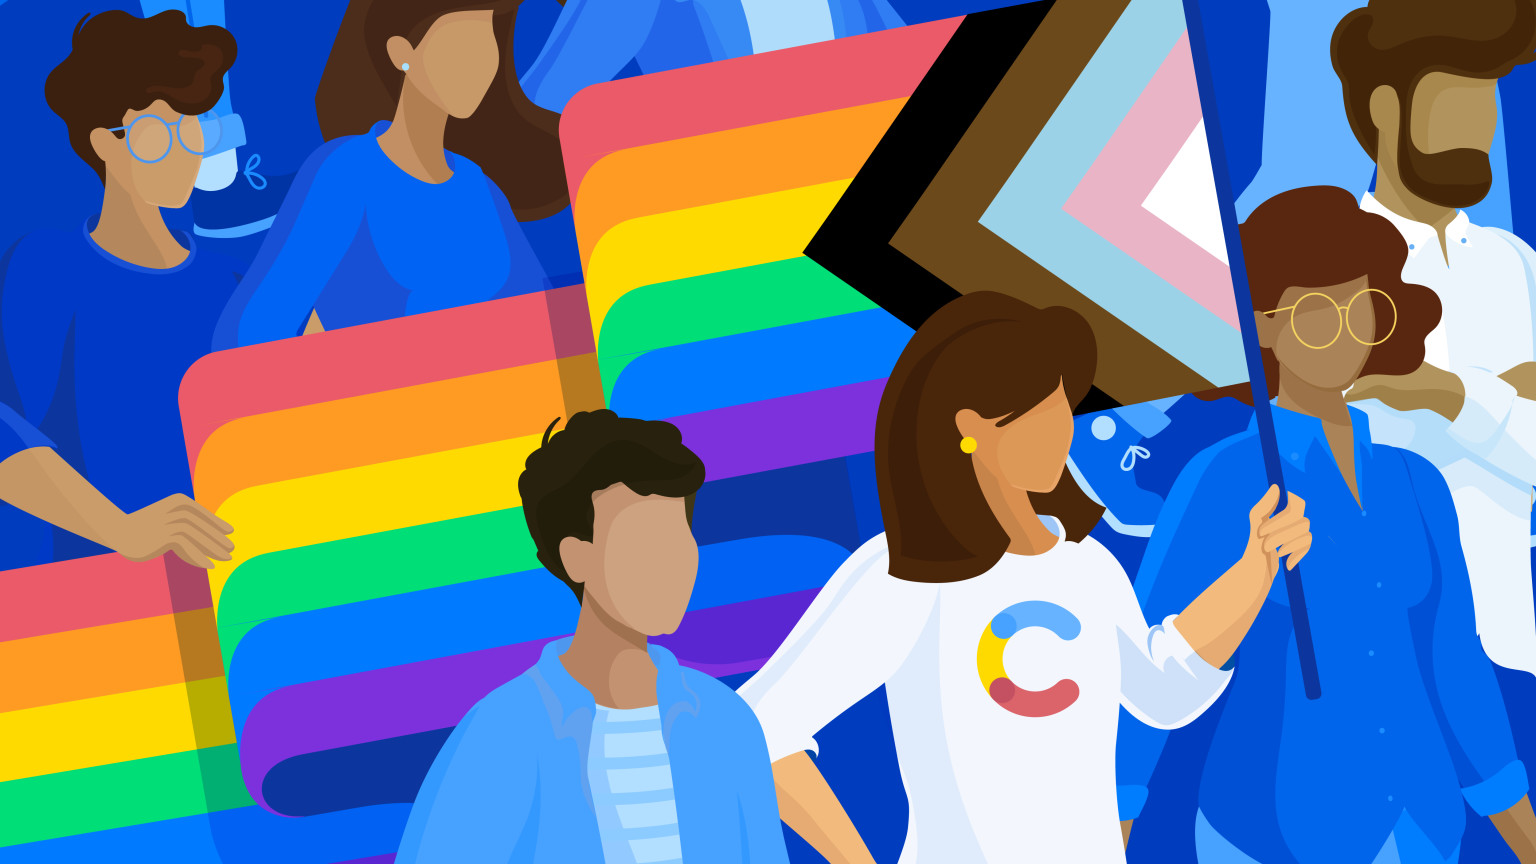 In the people team we support members of the LGBTQIA+ community find jobs and feel comfortable where they work, whether it's at Contentful or elsewhere.